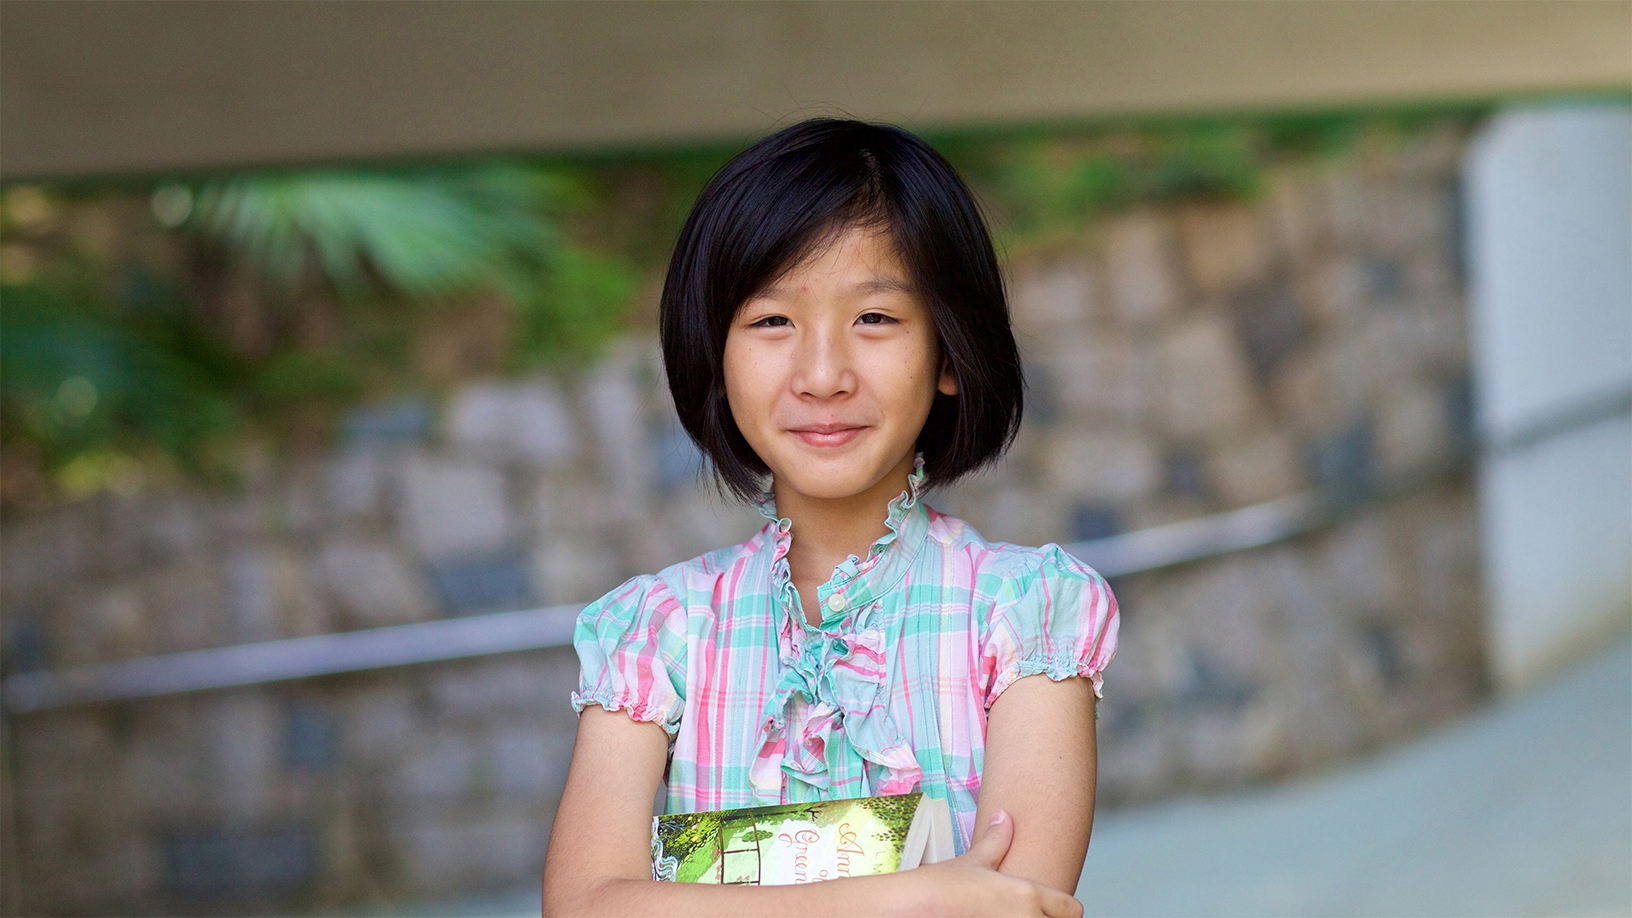 Hillary Yip, 14-year-old developer and CEO